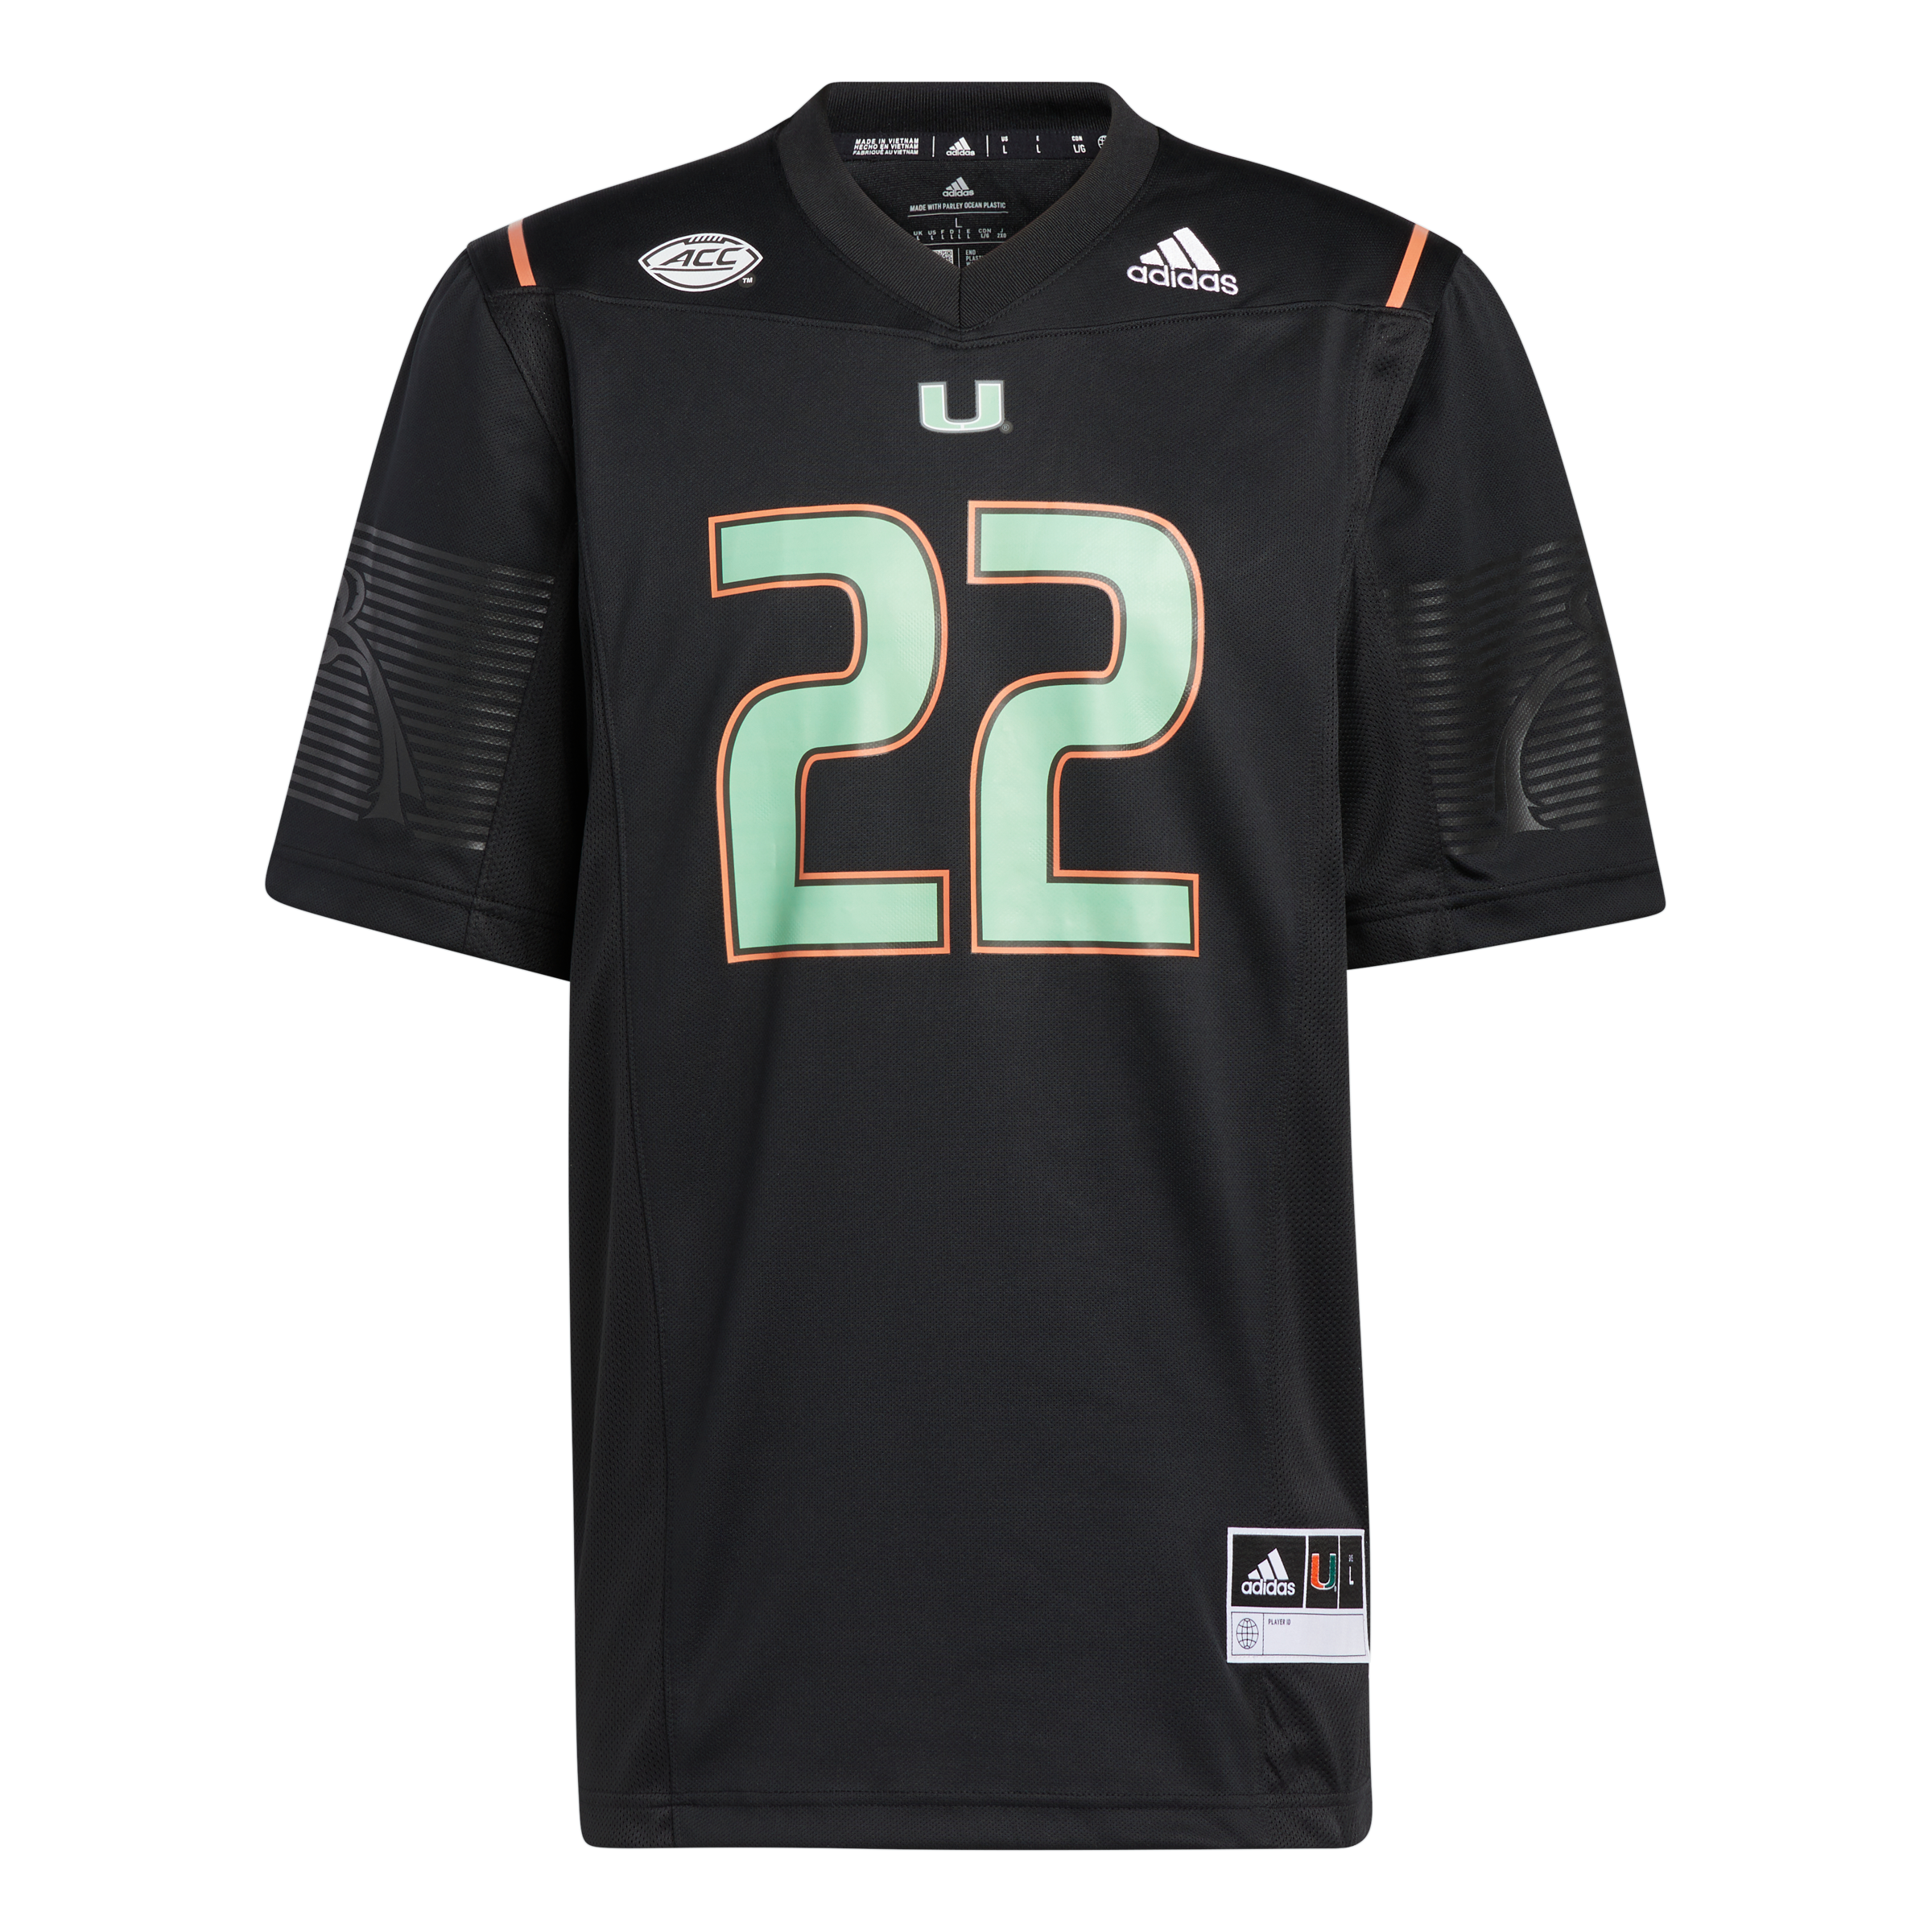 Custom College Basketball Jerseys Miami Hurricanes Jersey Name and Number ACC Black